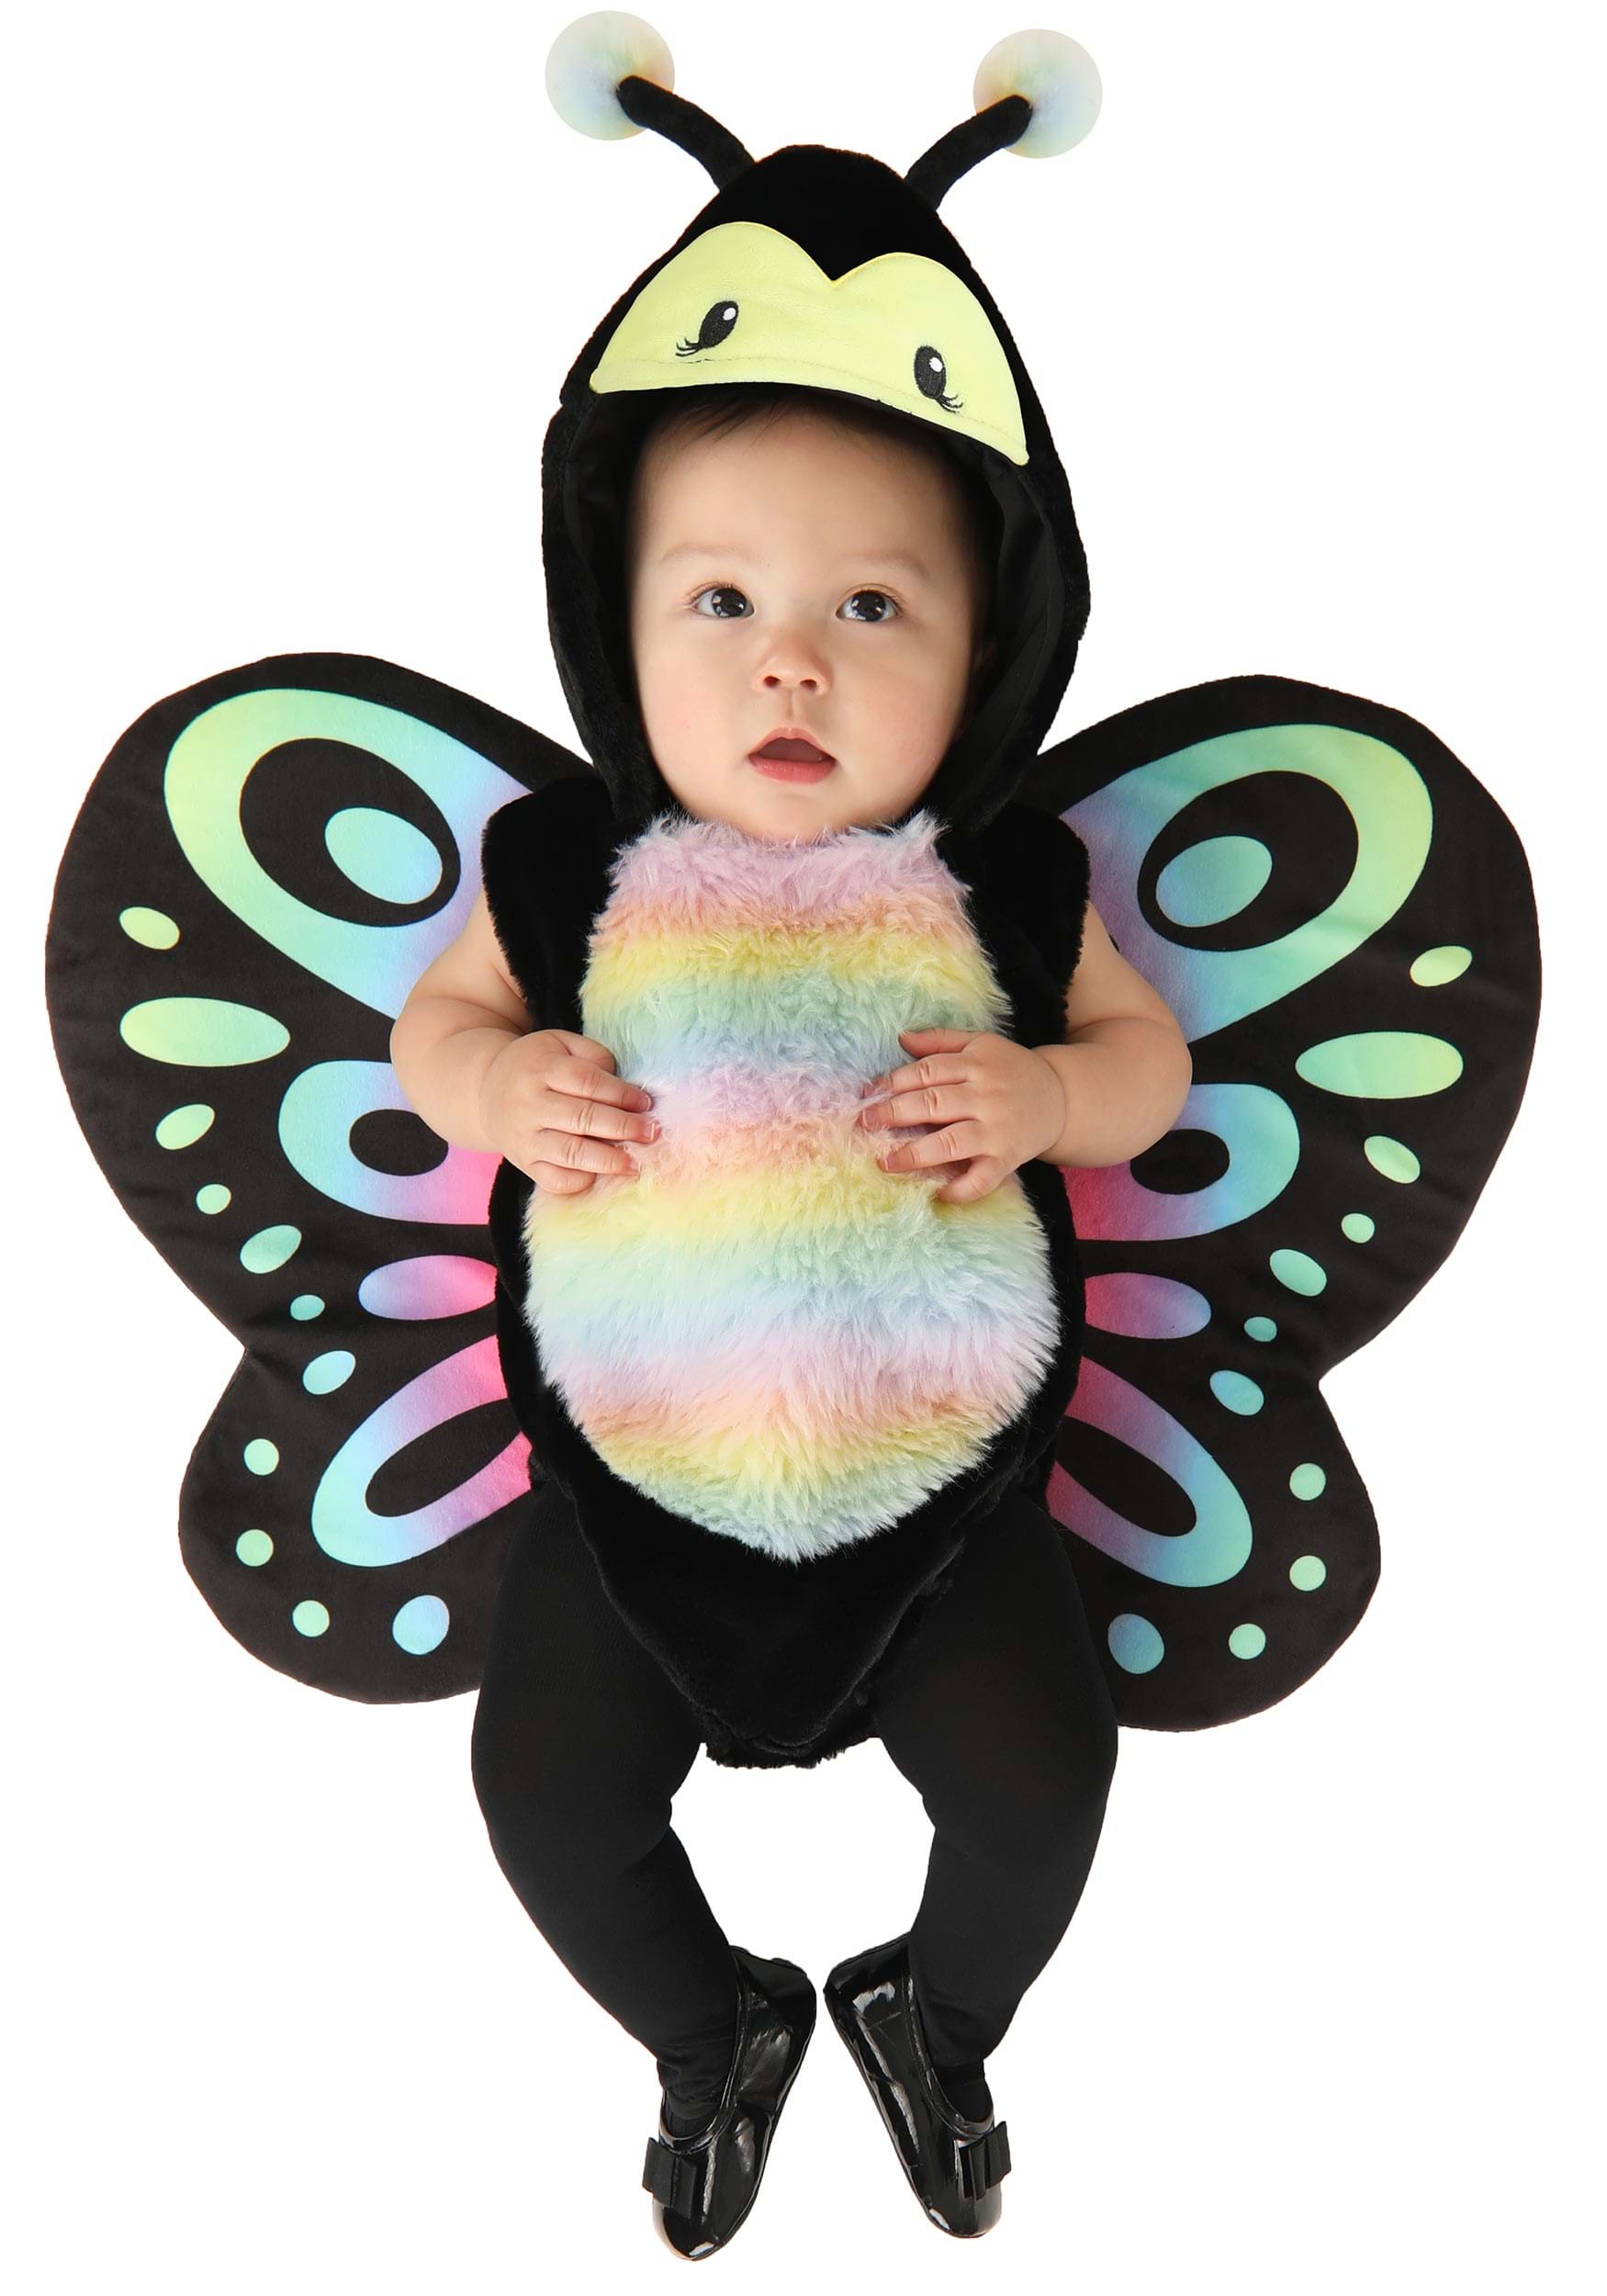 Spread Your Wings, Butterfly Cotton Baby Onesie